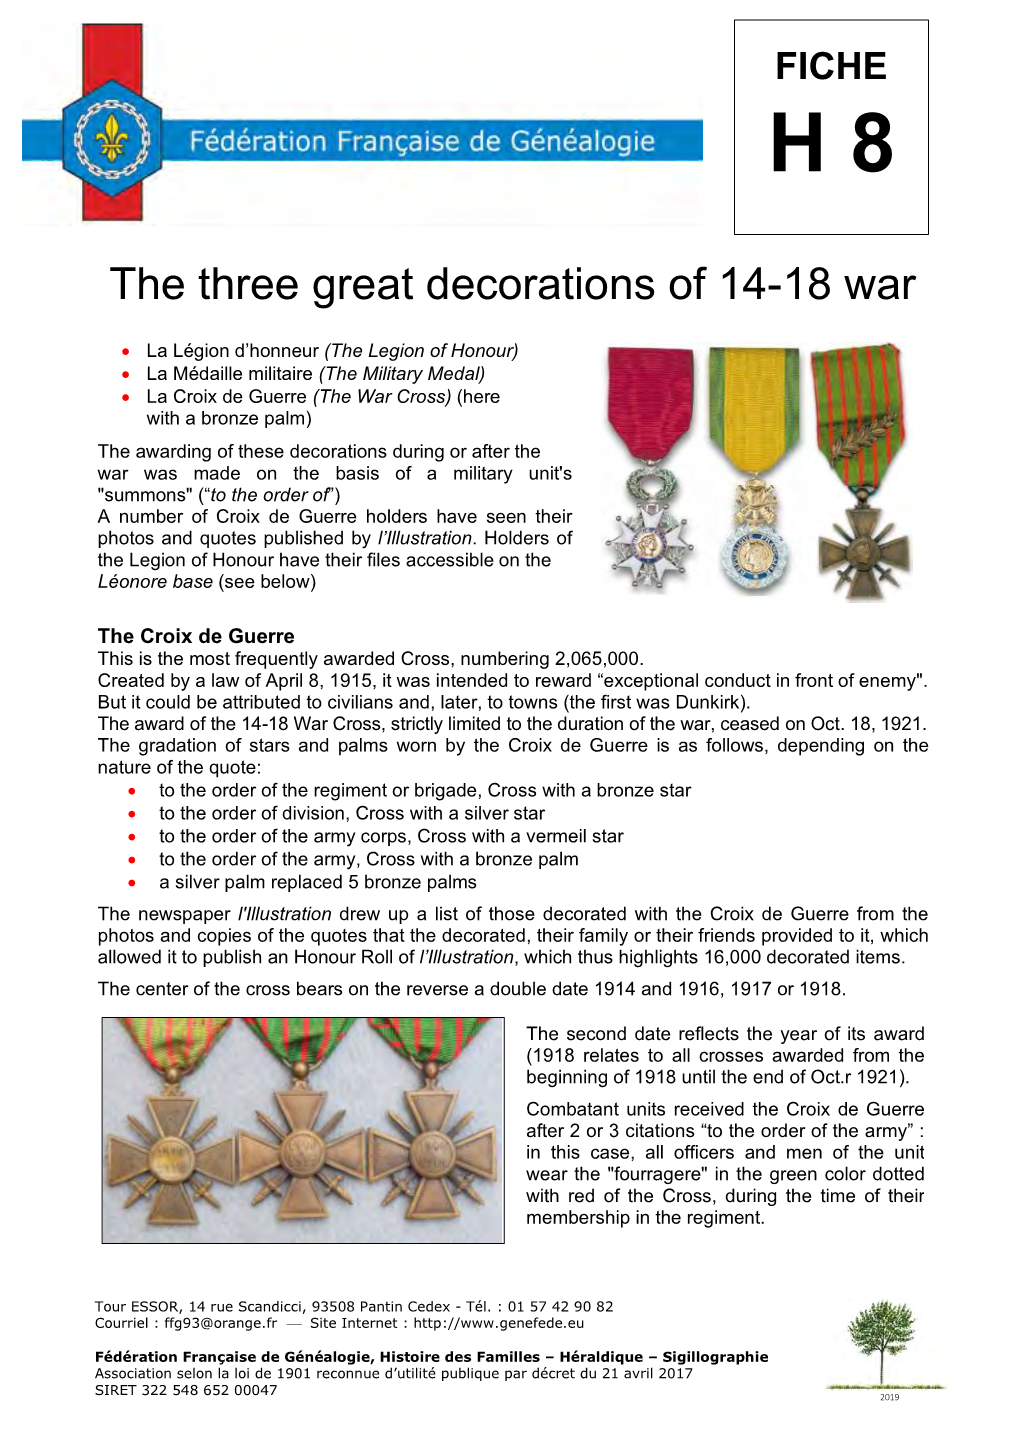 The Three Great Decorations of 14-18 War